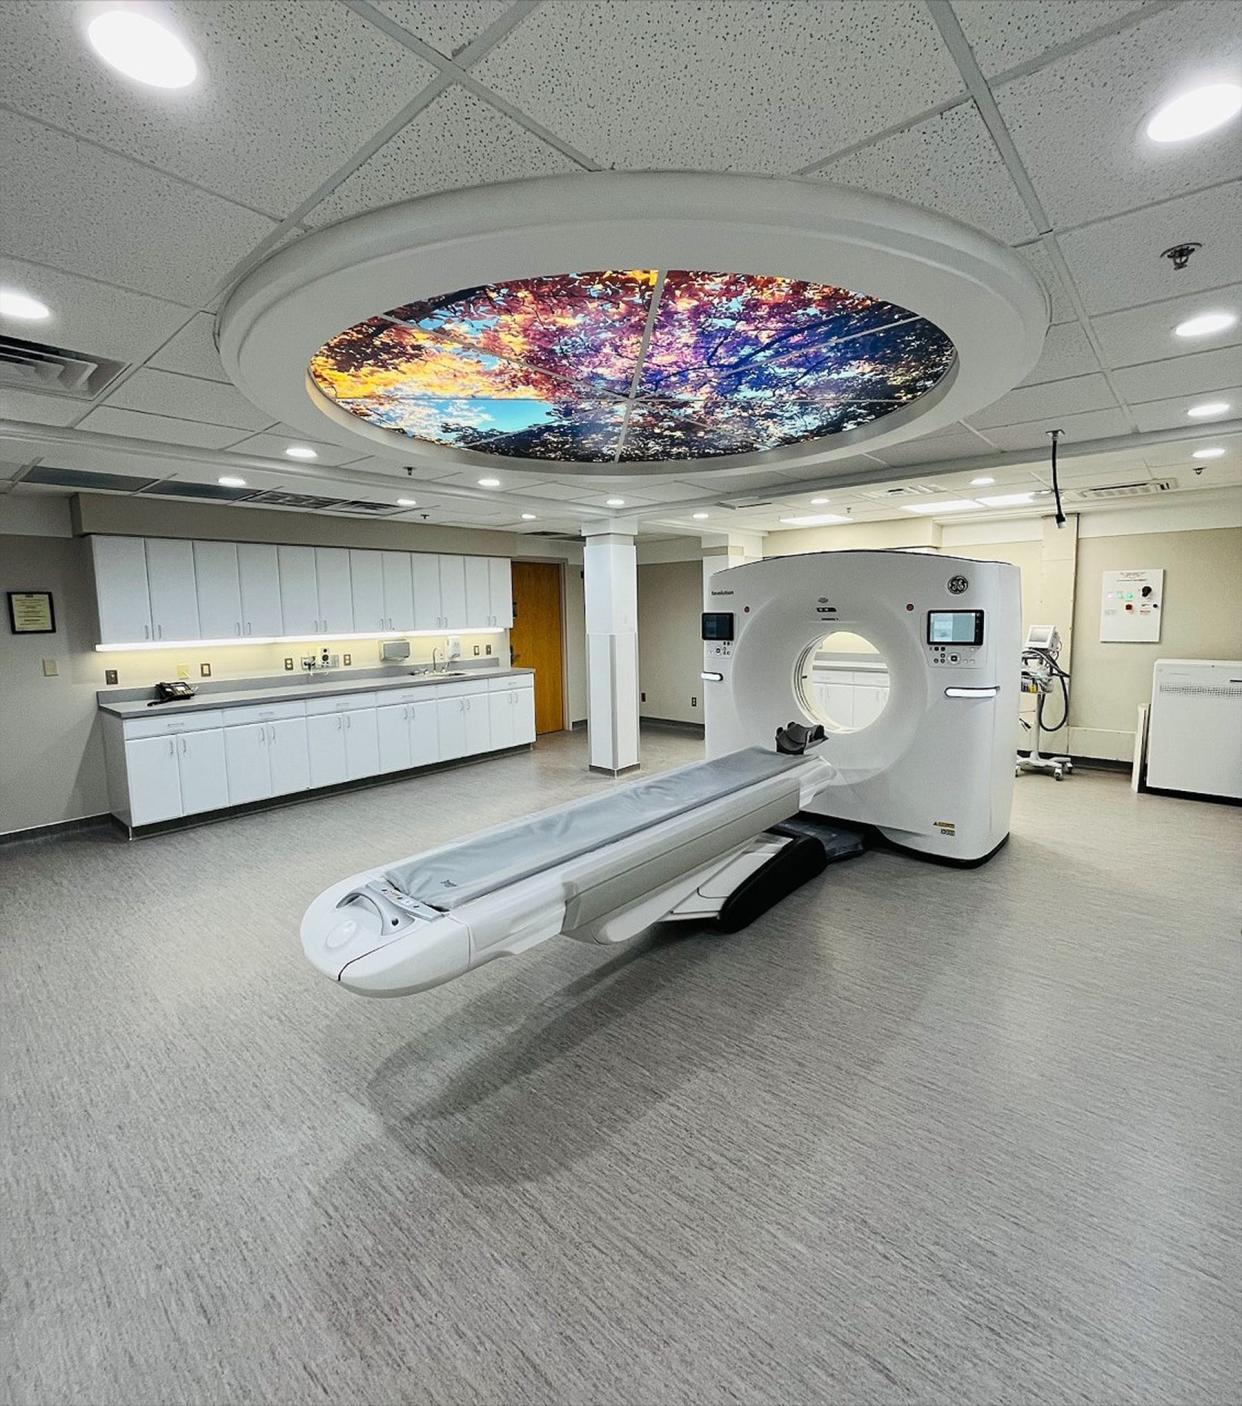 A large-scale technology upgrade project for Munson Healthcare’s radiology services is now underway with the installation of five new GE 256-Slice Revolution computed tomography (CT) scanners. Munson Healthcare Charlevoix Hospital is the first of four Munson Healthcare hospital sites to receive the new technology.